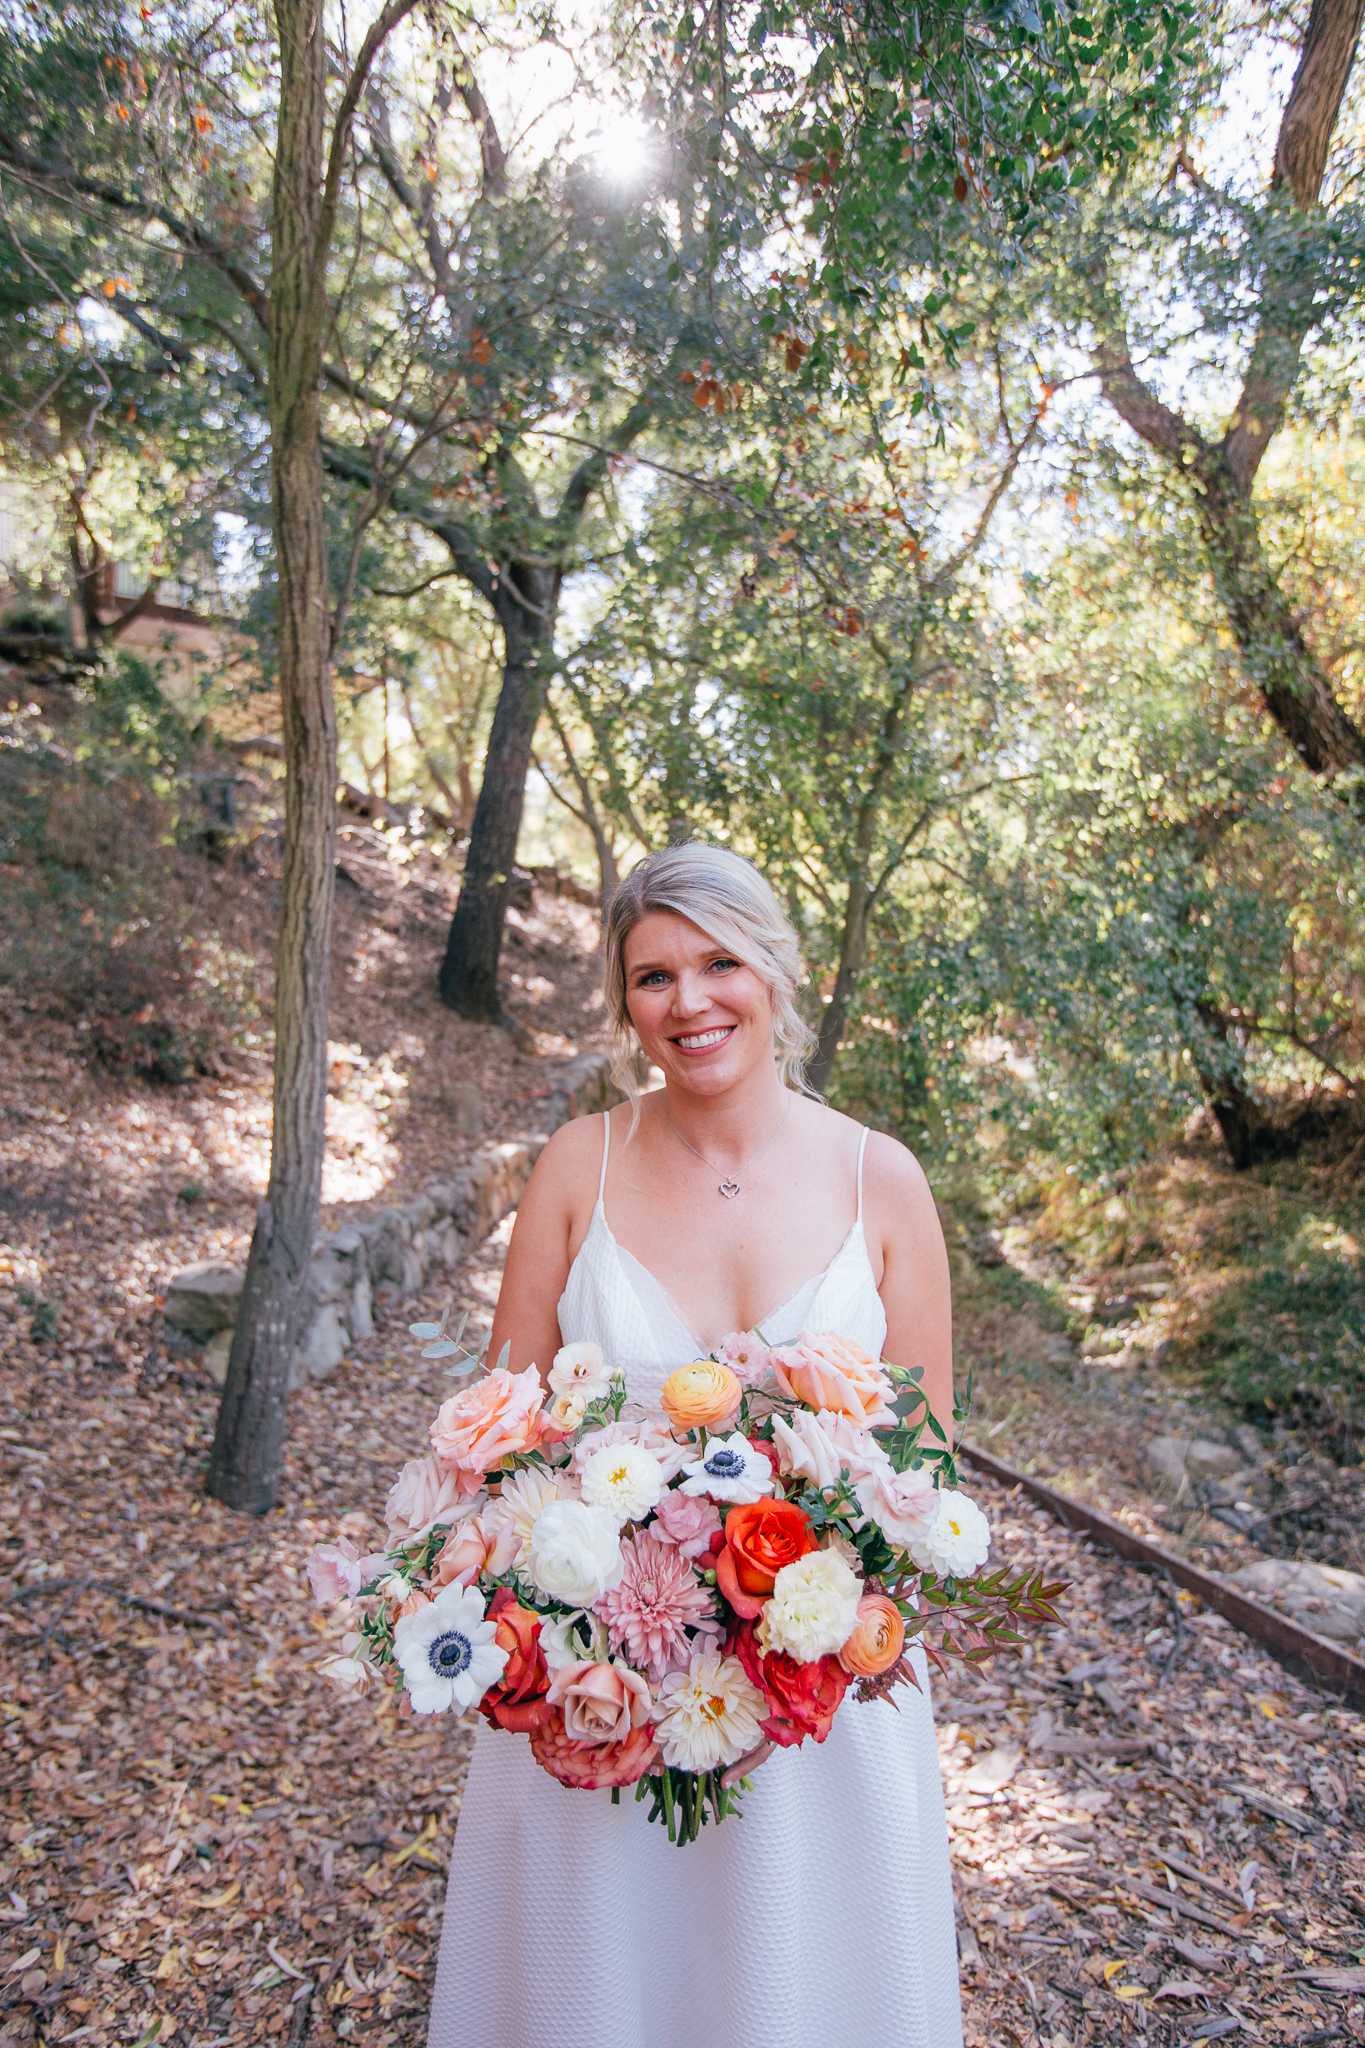 bride in spaghetti strap dress stands with bright and vibrant wedding bouquet with mixture of colorful flowers